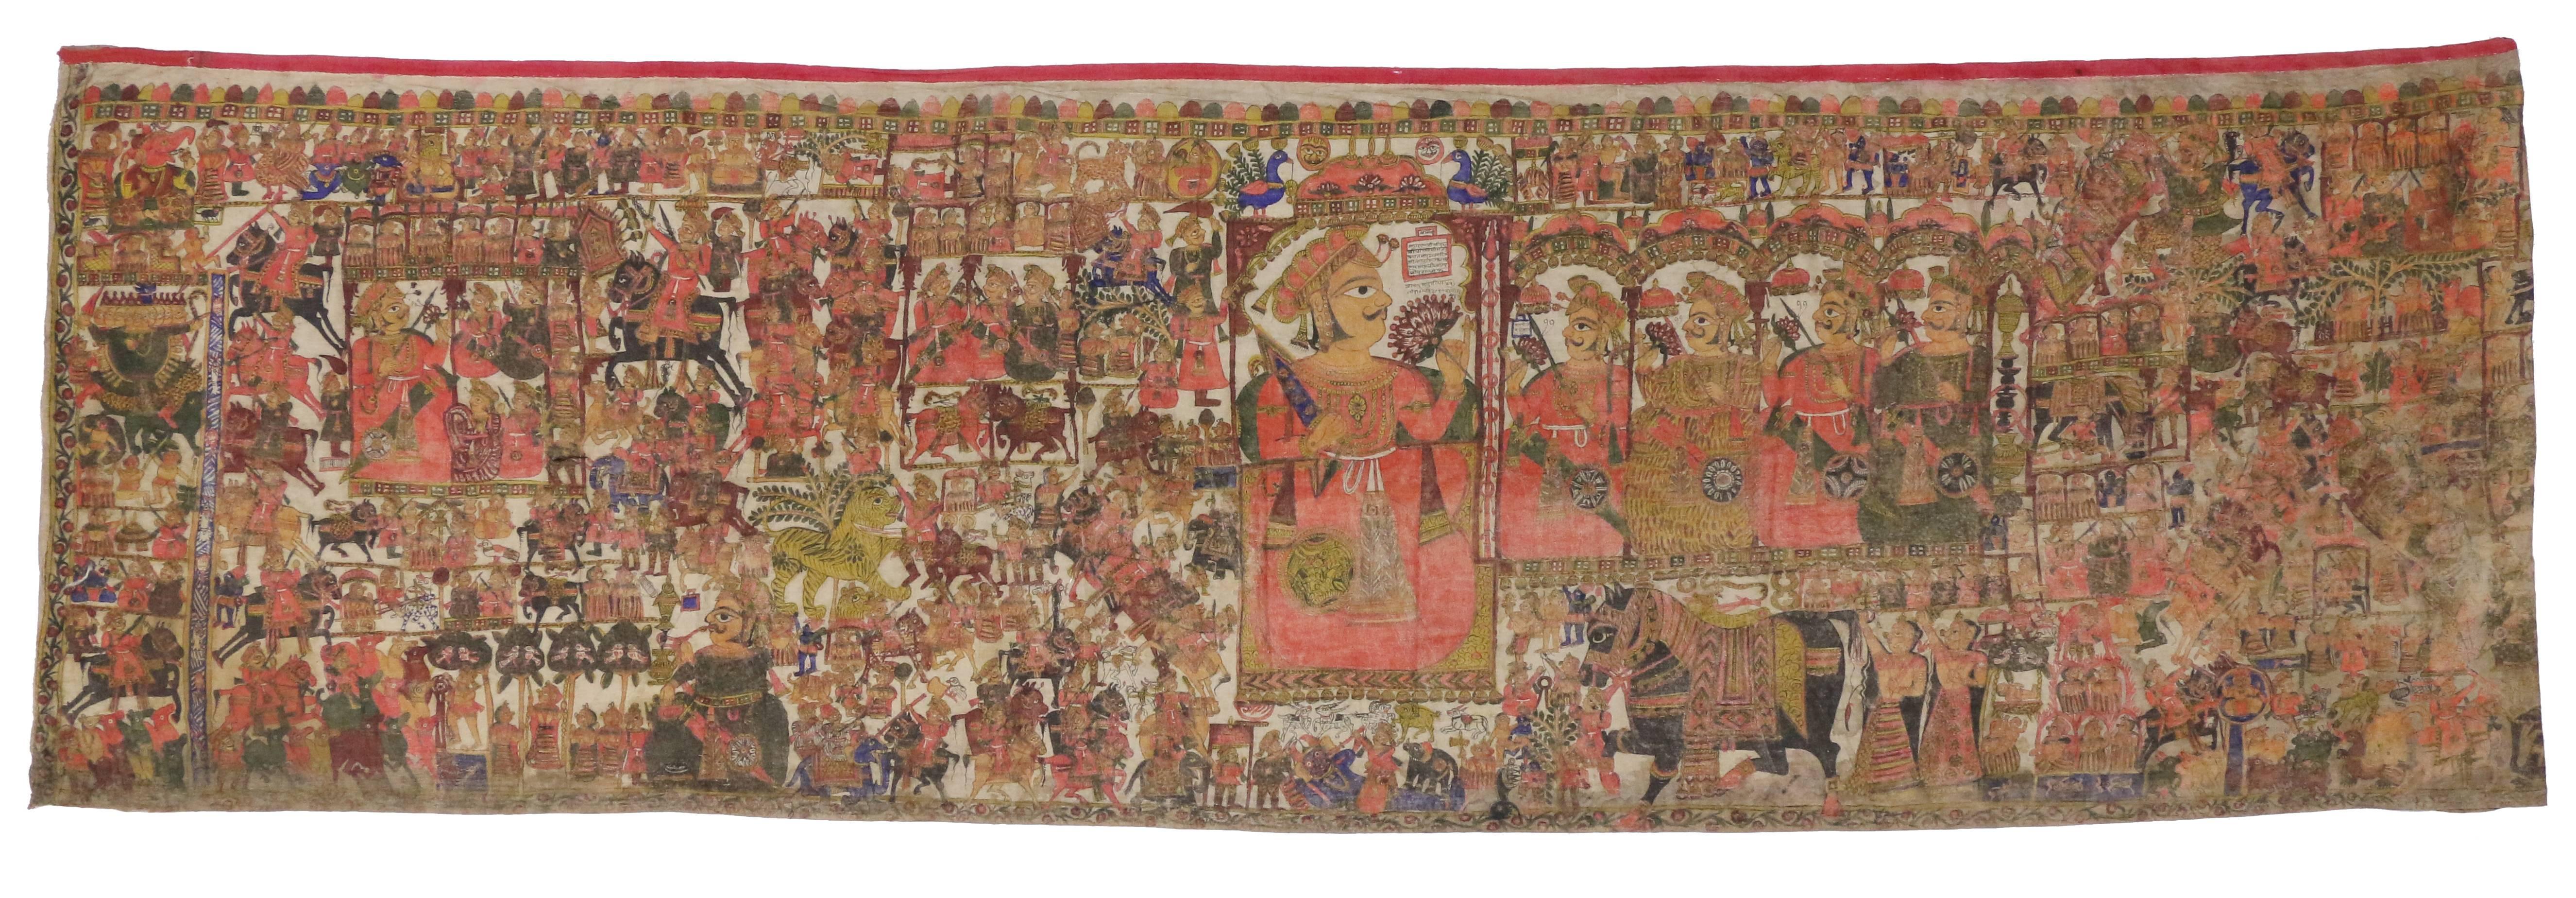 18th Century Antique Indian Medieval Tapestry after the Battle of Karnal in 1739 For Sale 1